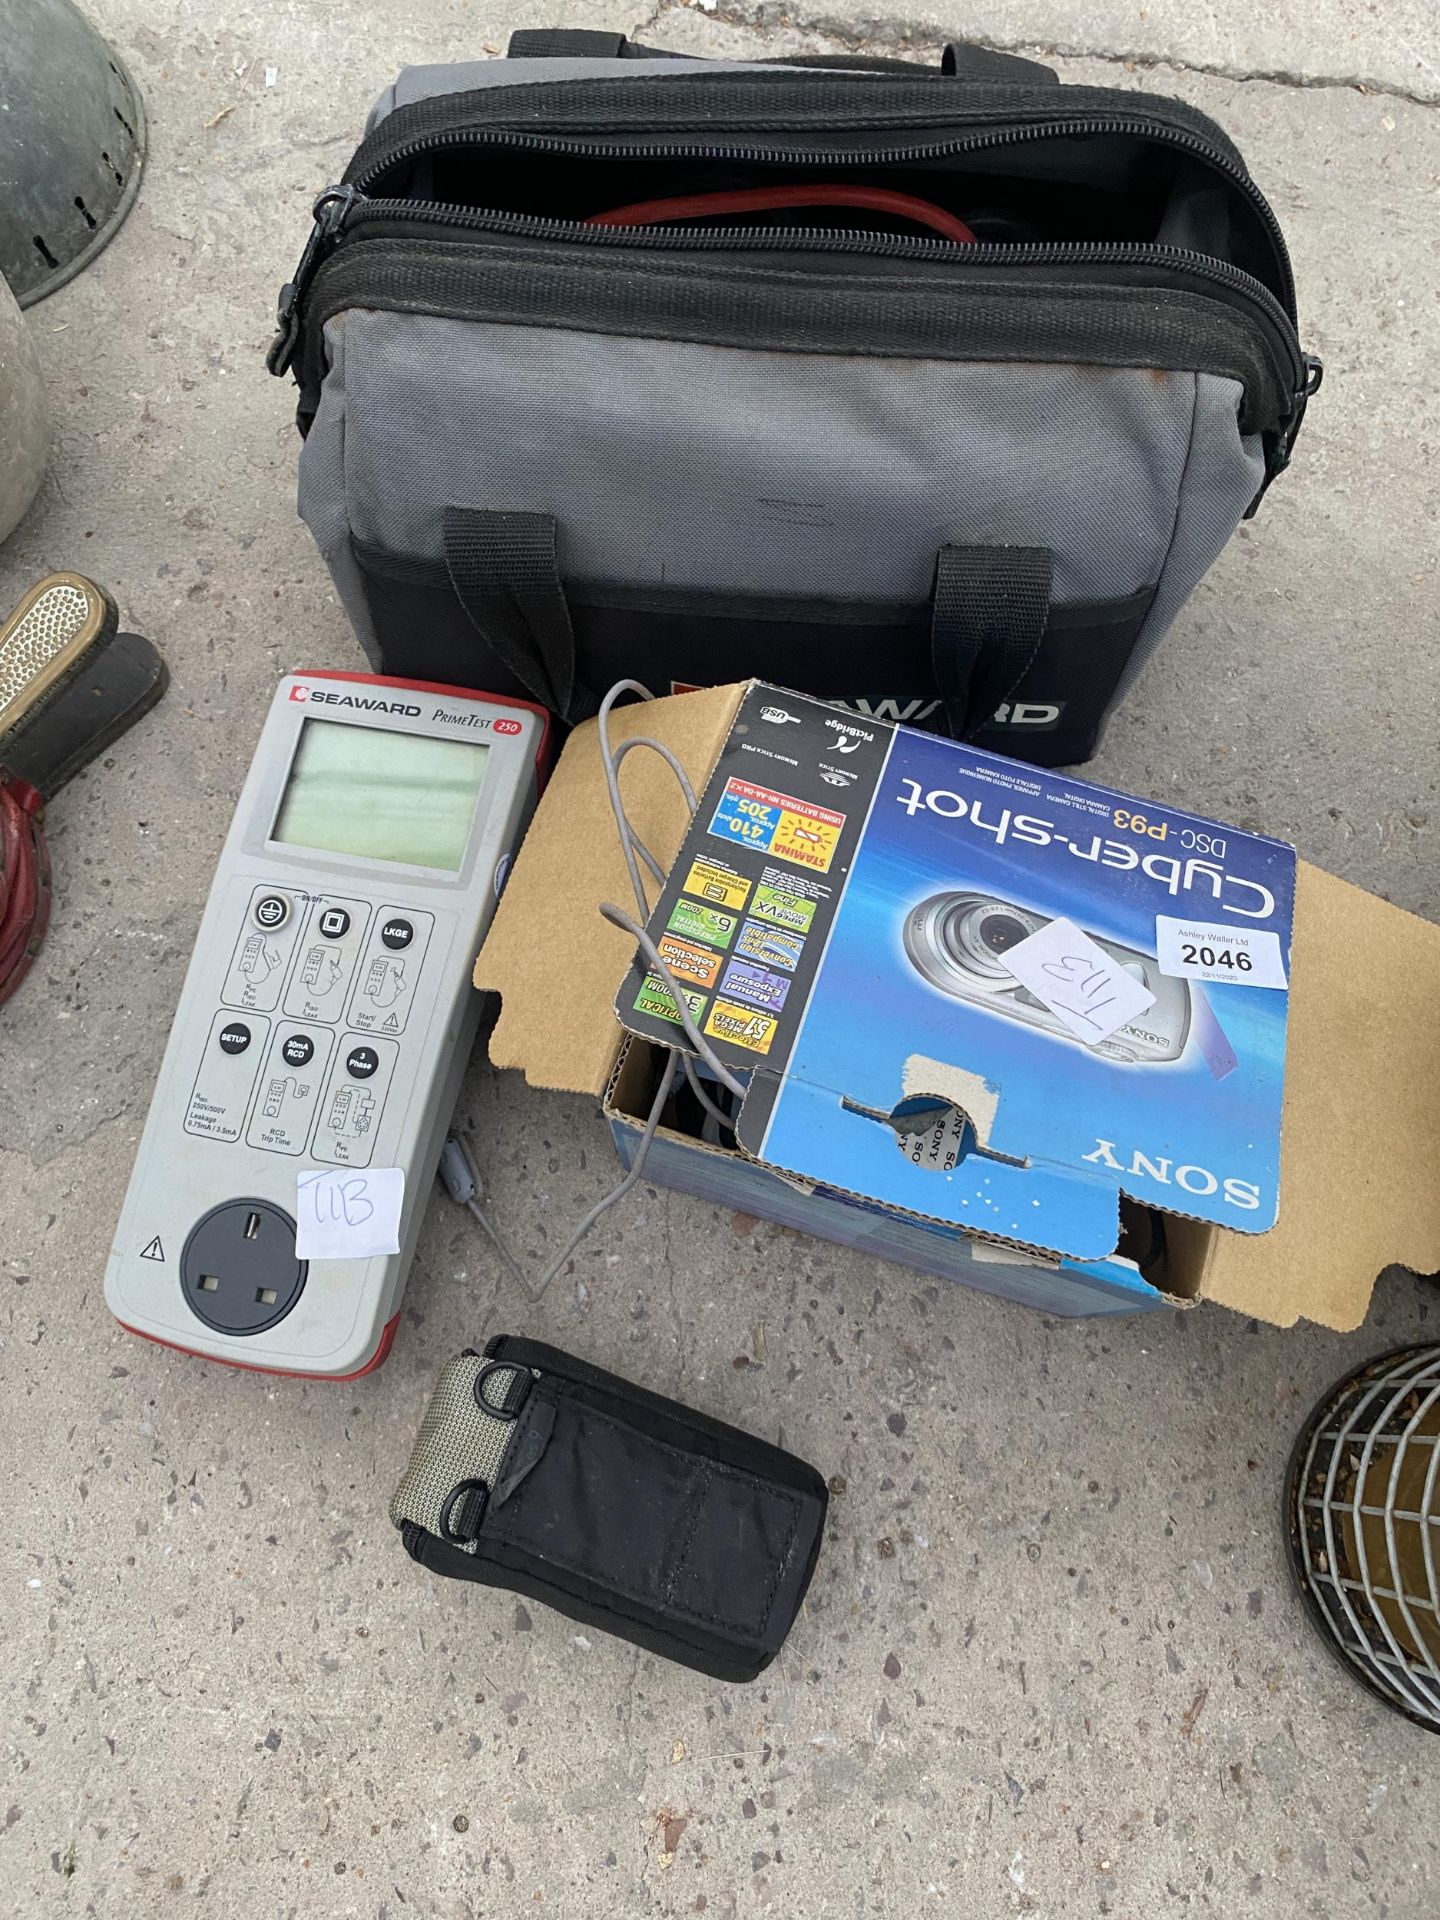 AN ASSORTMENT OF ITEMS TO INCLUDE A SONY CAMERA AND A SEAWRD PRIME TESTER ETC